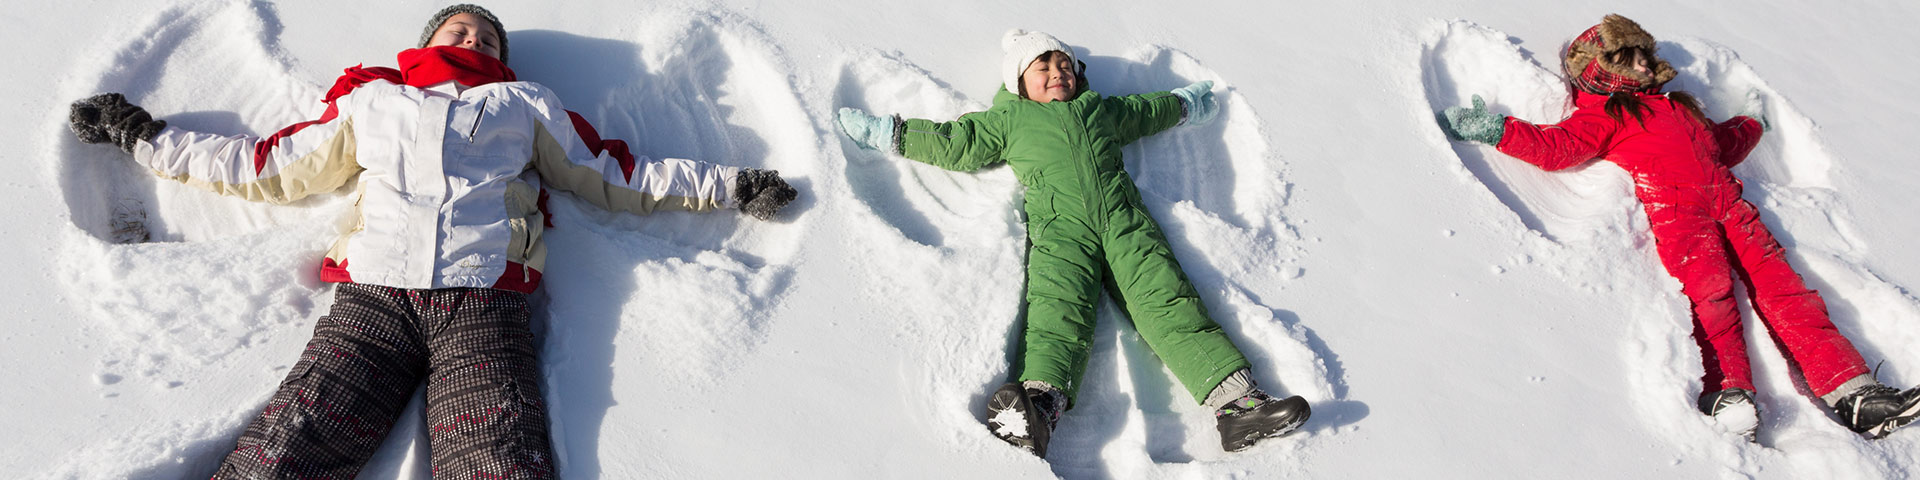 Children make snow angles in the snow in Elk Island National Park.